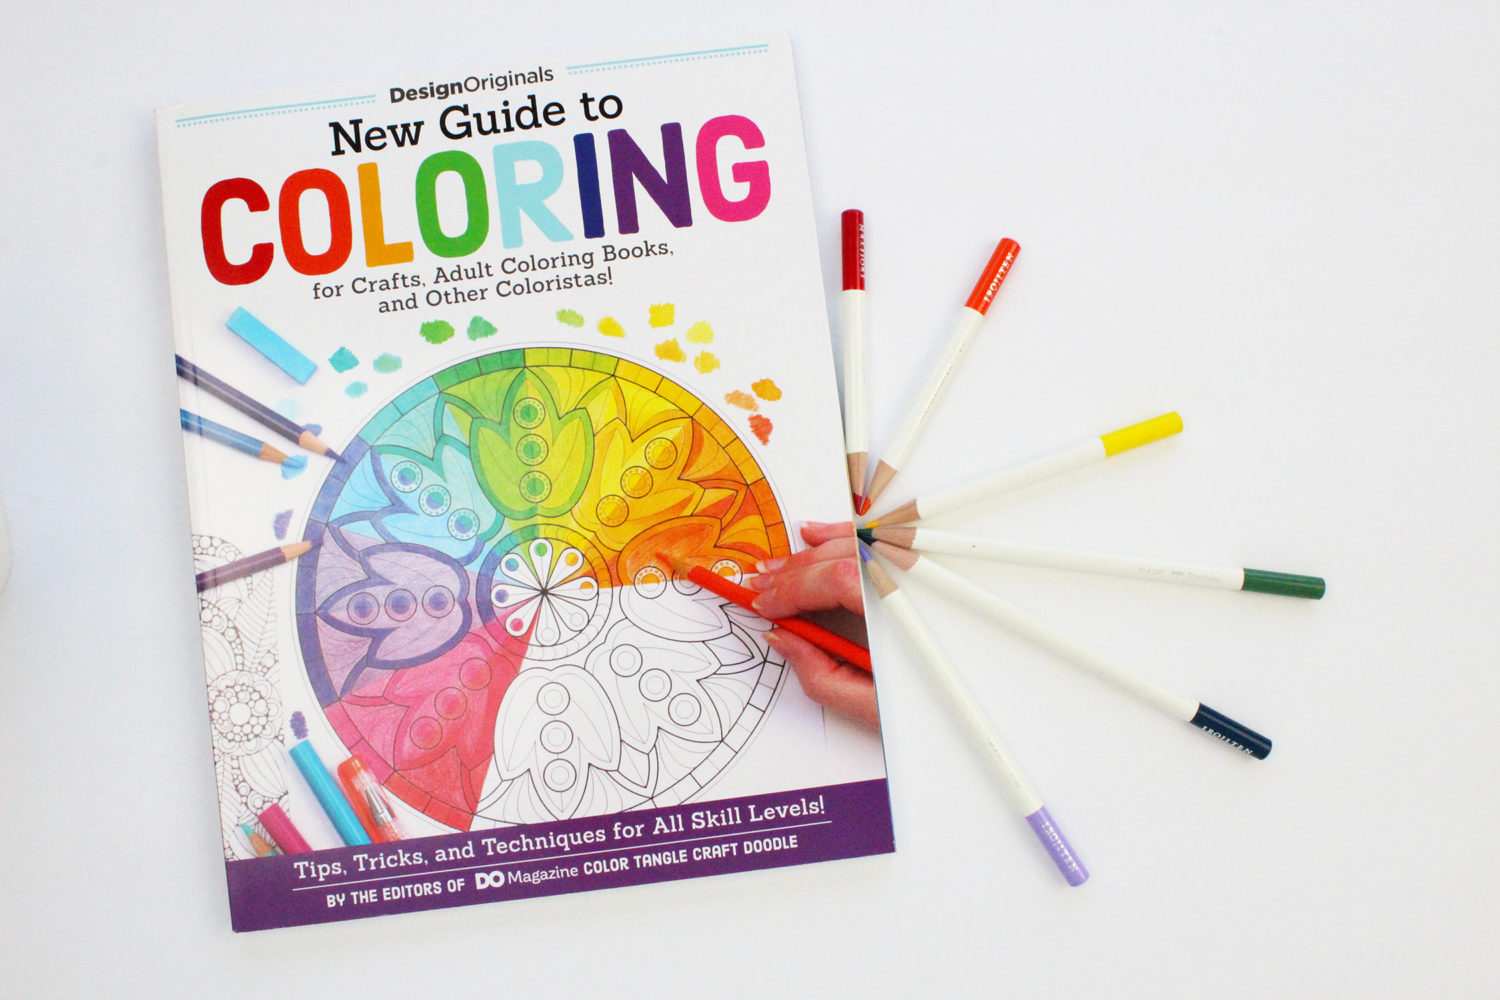 Learn 5 Color Combinations for Colored Pencils from @jenniegarcian at the #tombowusa blog #coloring #tombow 